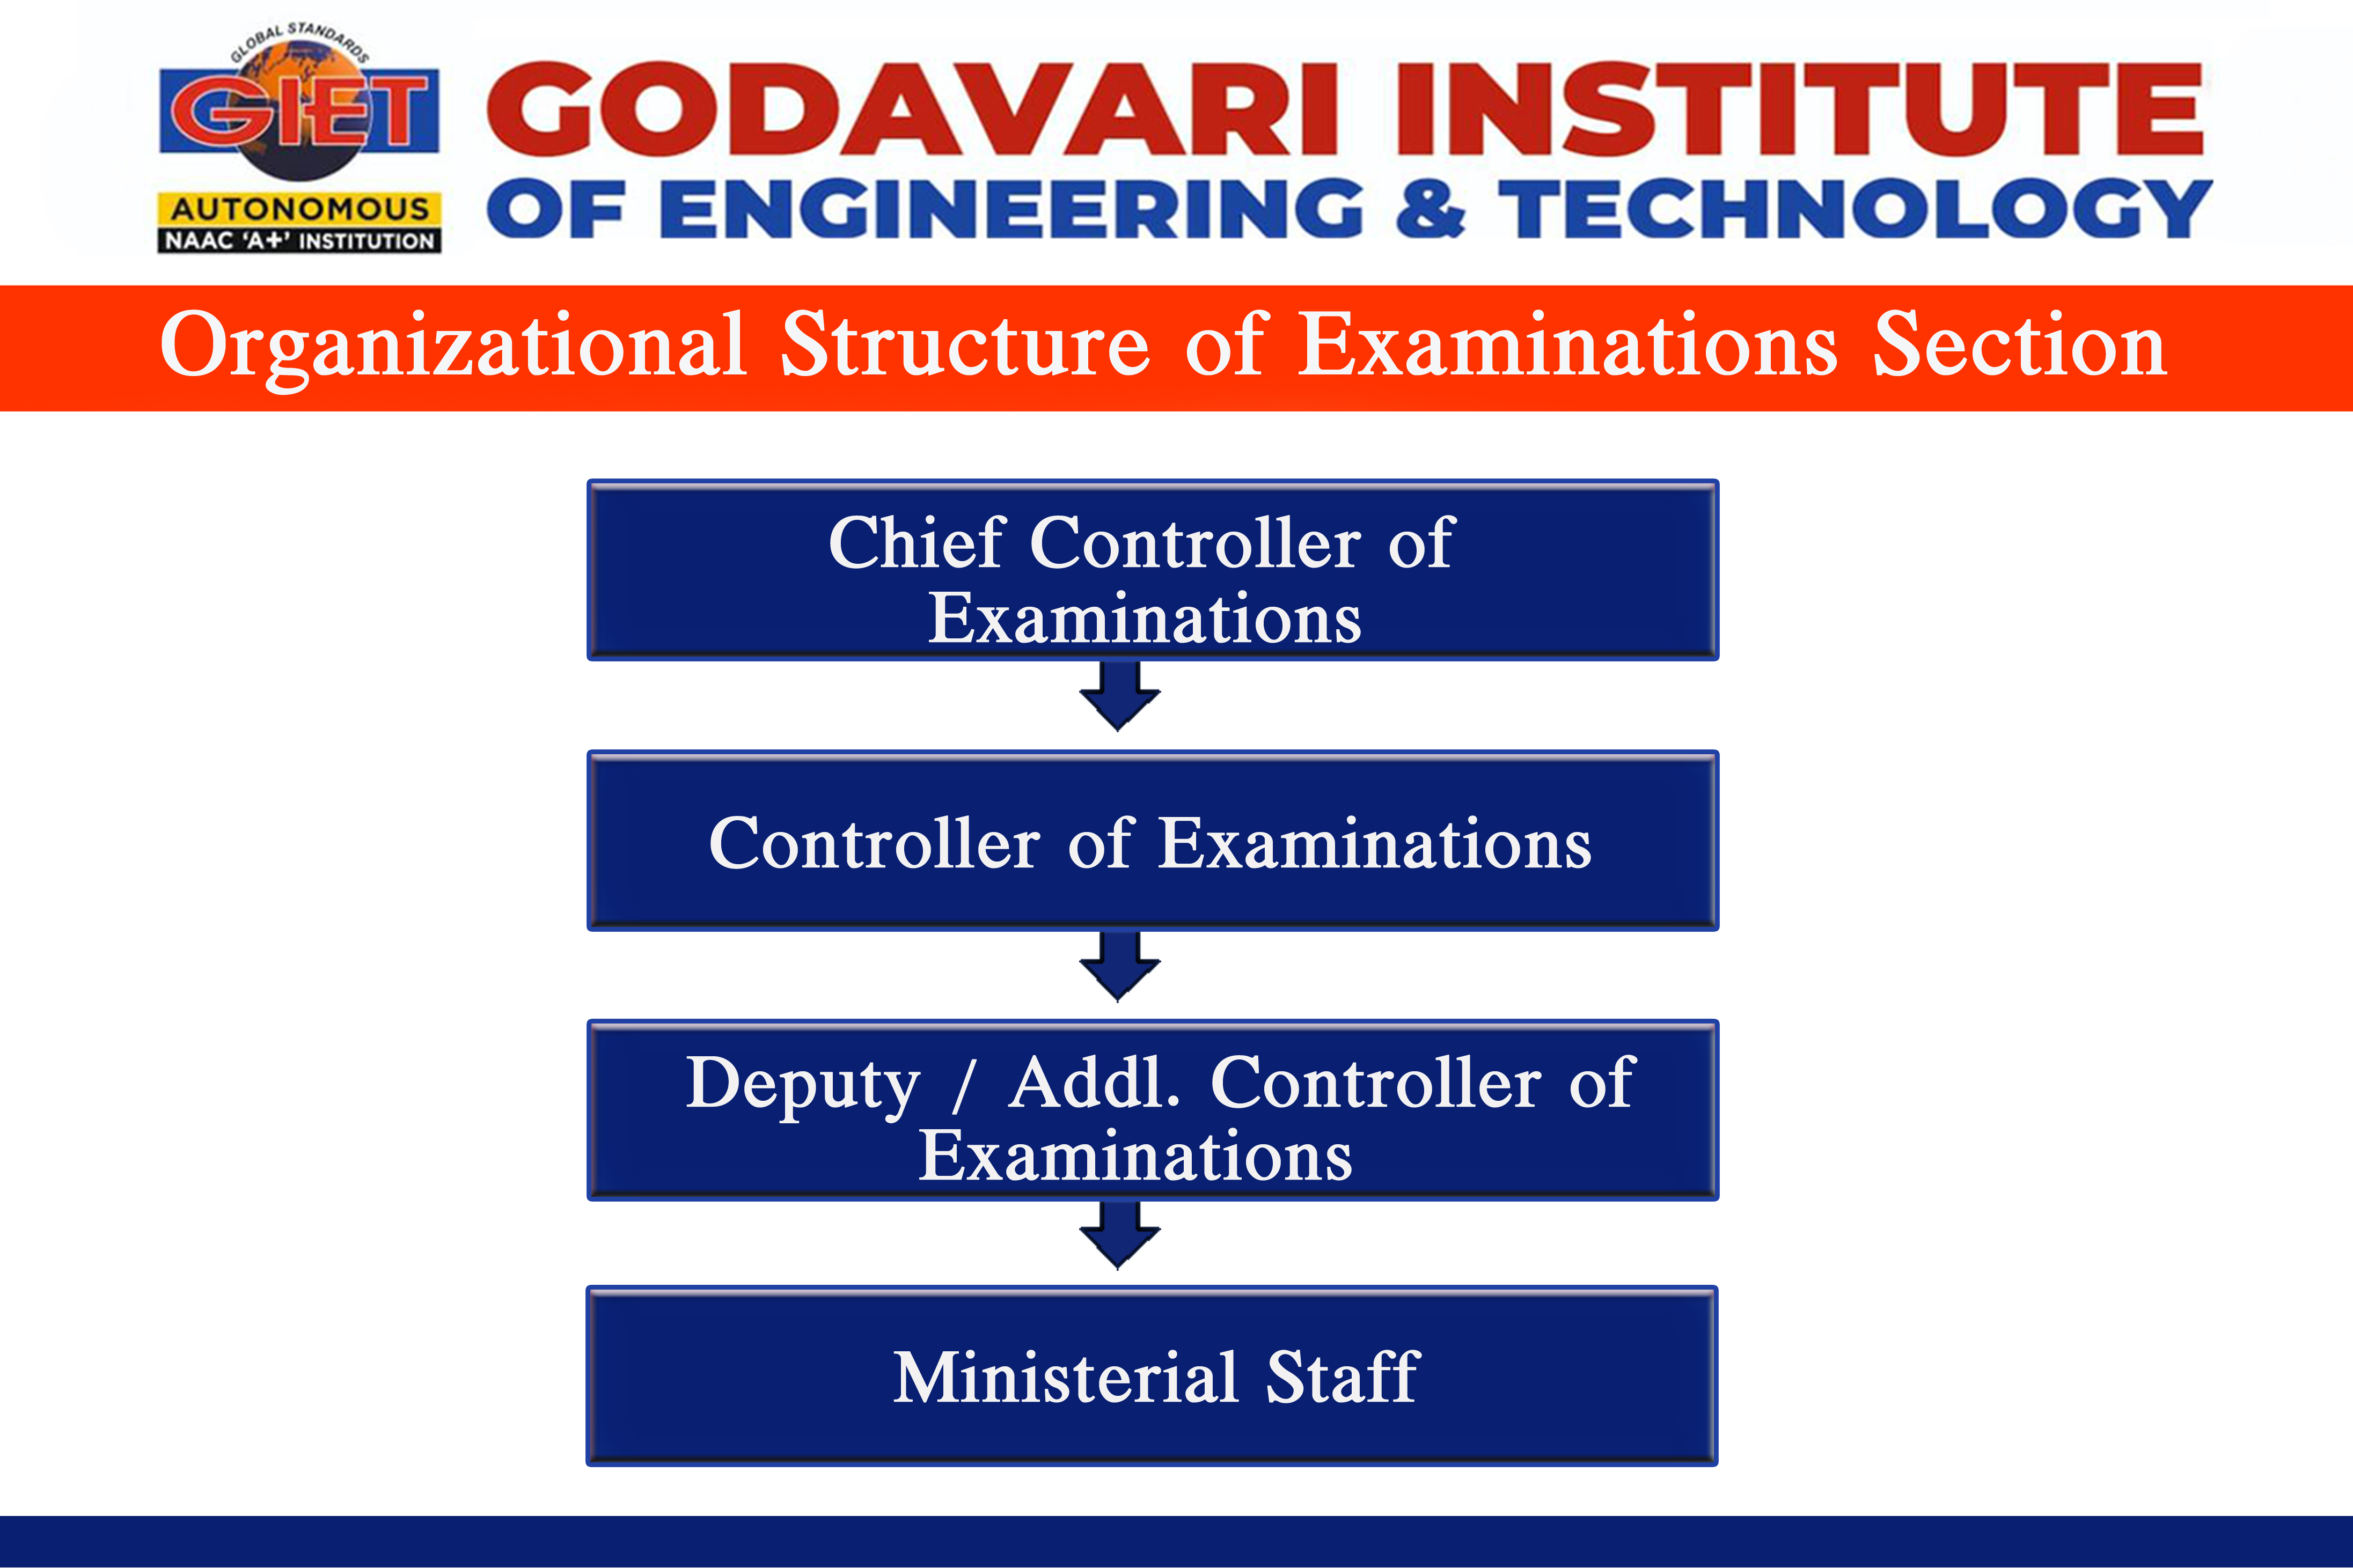 Organizational Structure of Examinations Section